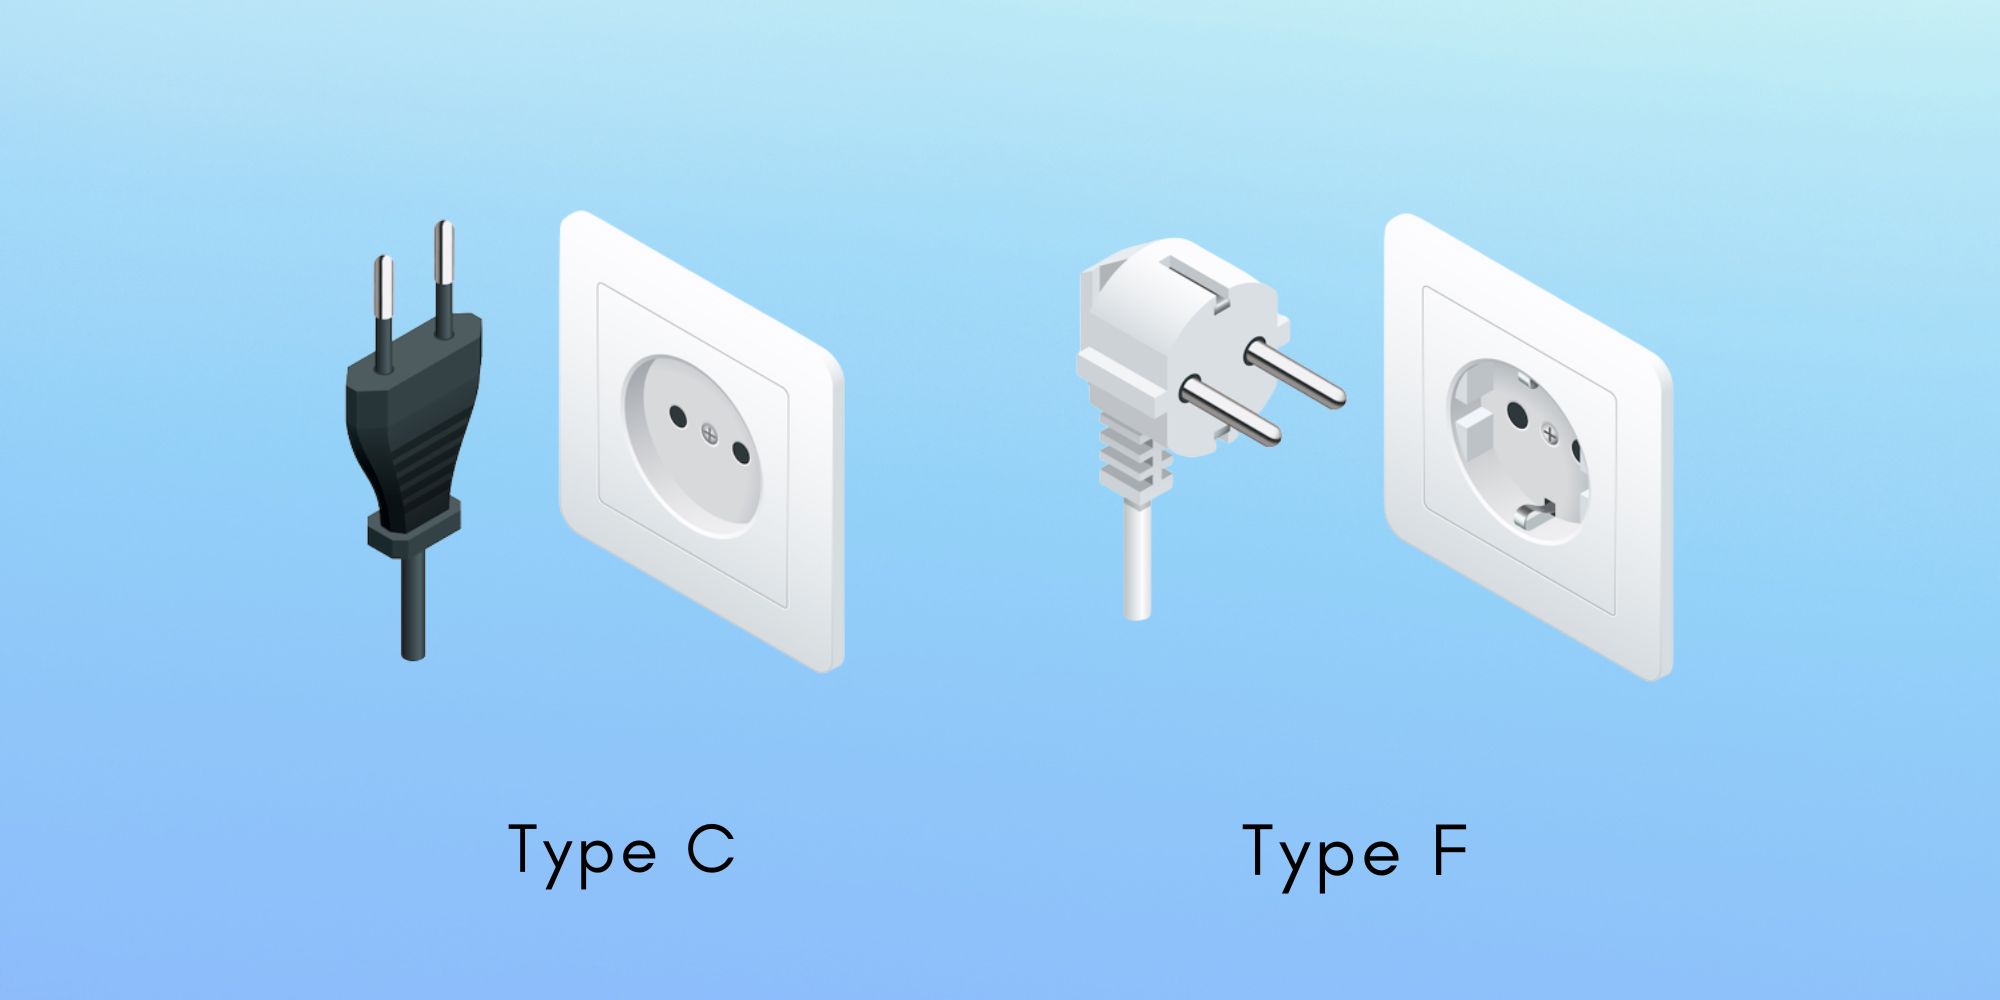 Ethiopia Power Plugs and Sockets: Type C and Type F
